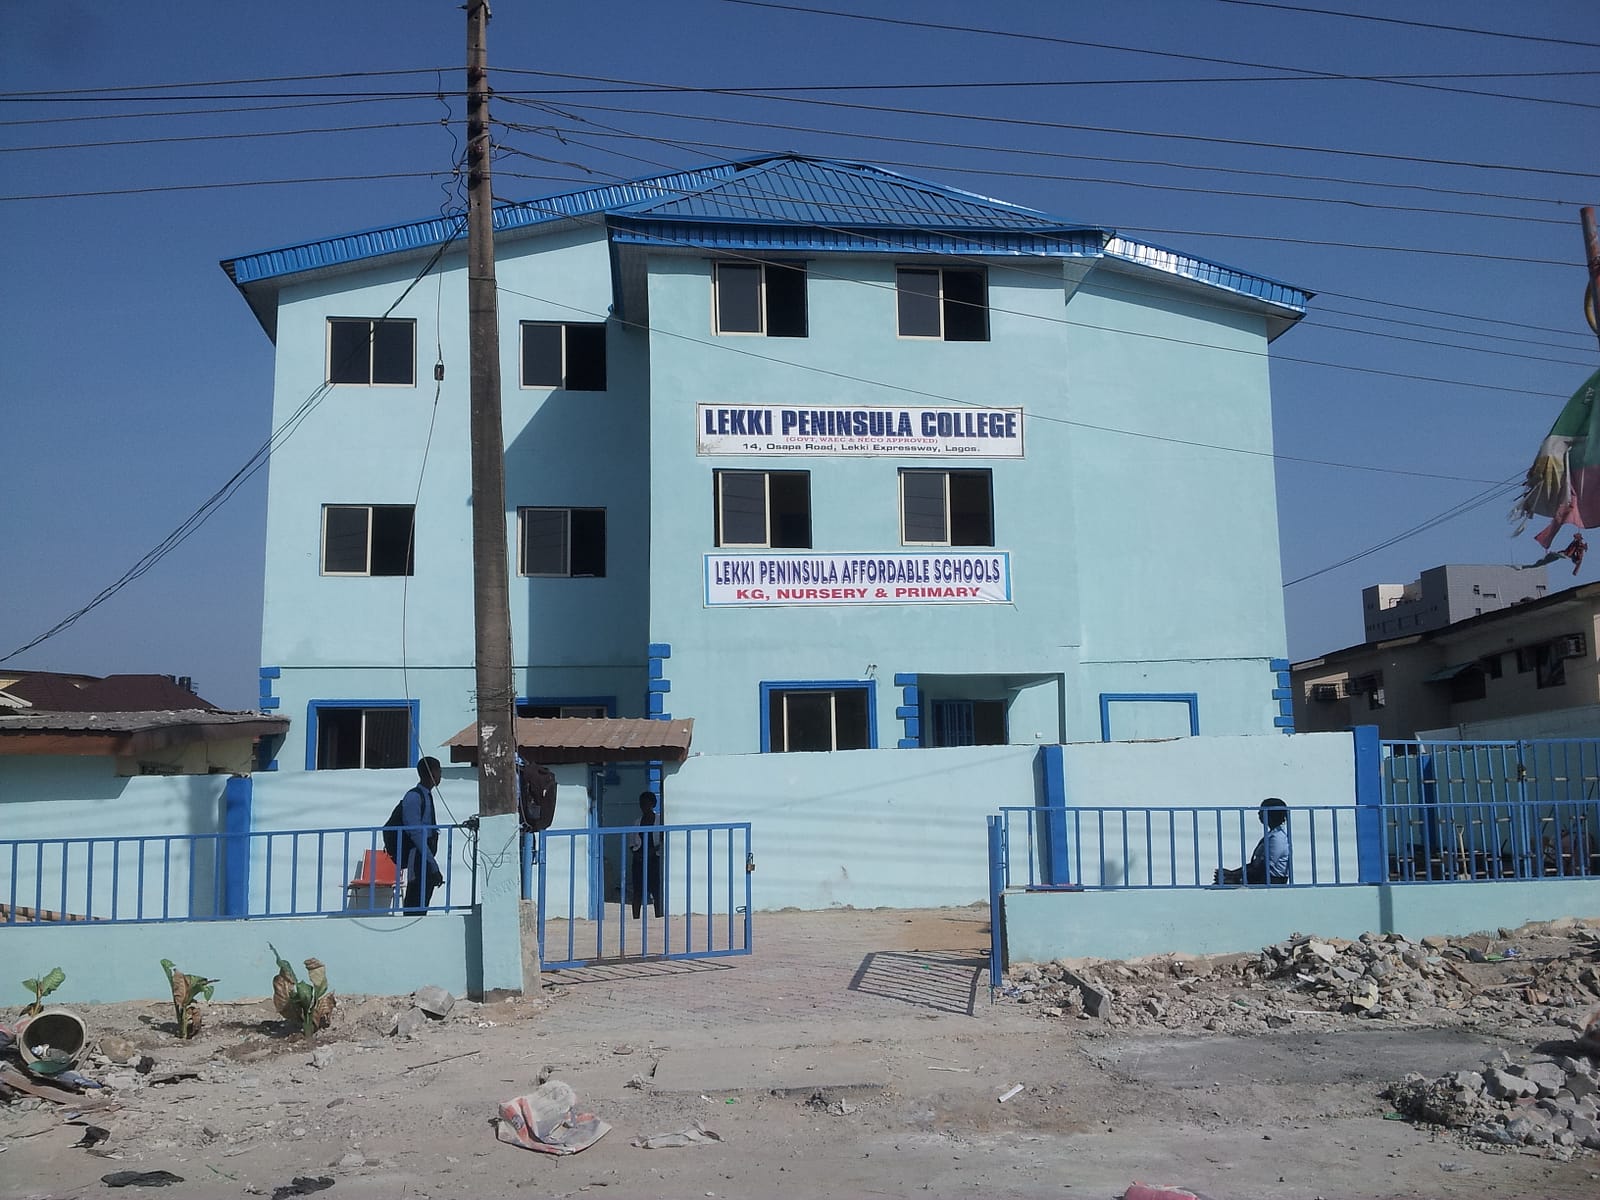 The bright Lekki Peninsula School, where lives are changed everyday.